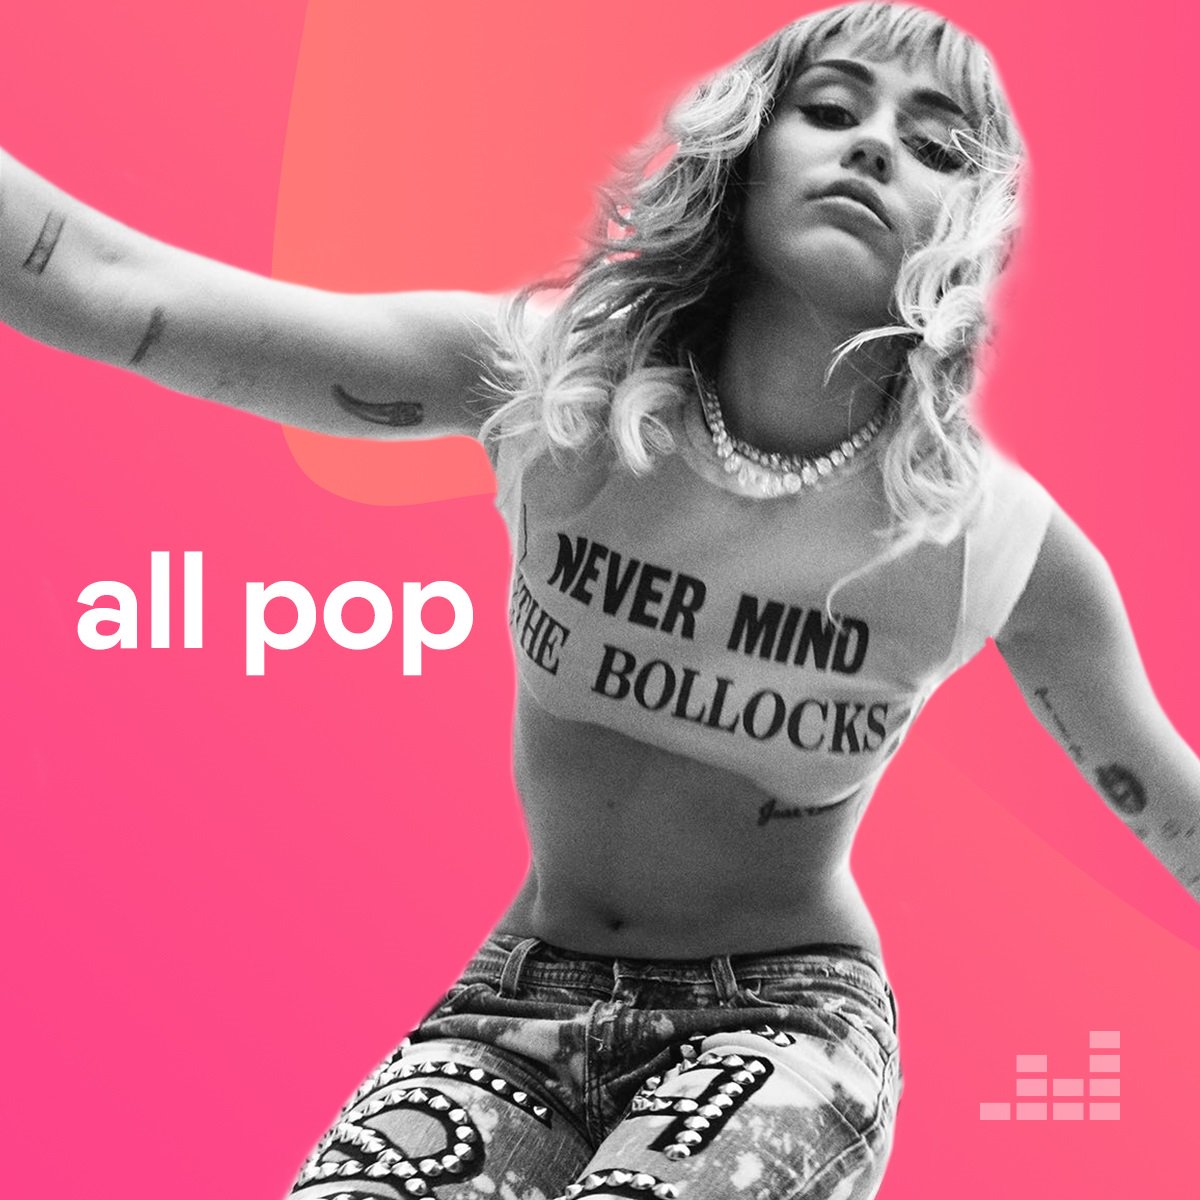 RT @RCARecords: ???? Check out @MileyCyrus featured on @Deezer’s #AllPop playlist!
 
>>https://t.co/7bG21MzTWD<< https://t.co/YU8HZtIO44